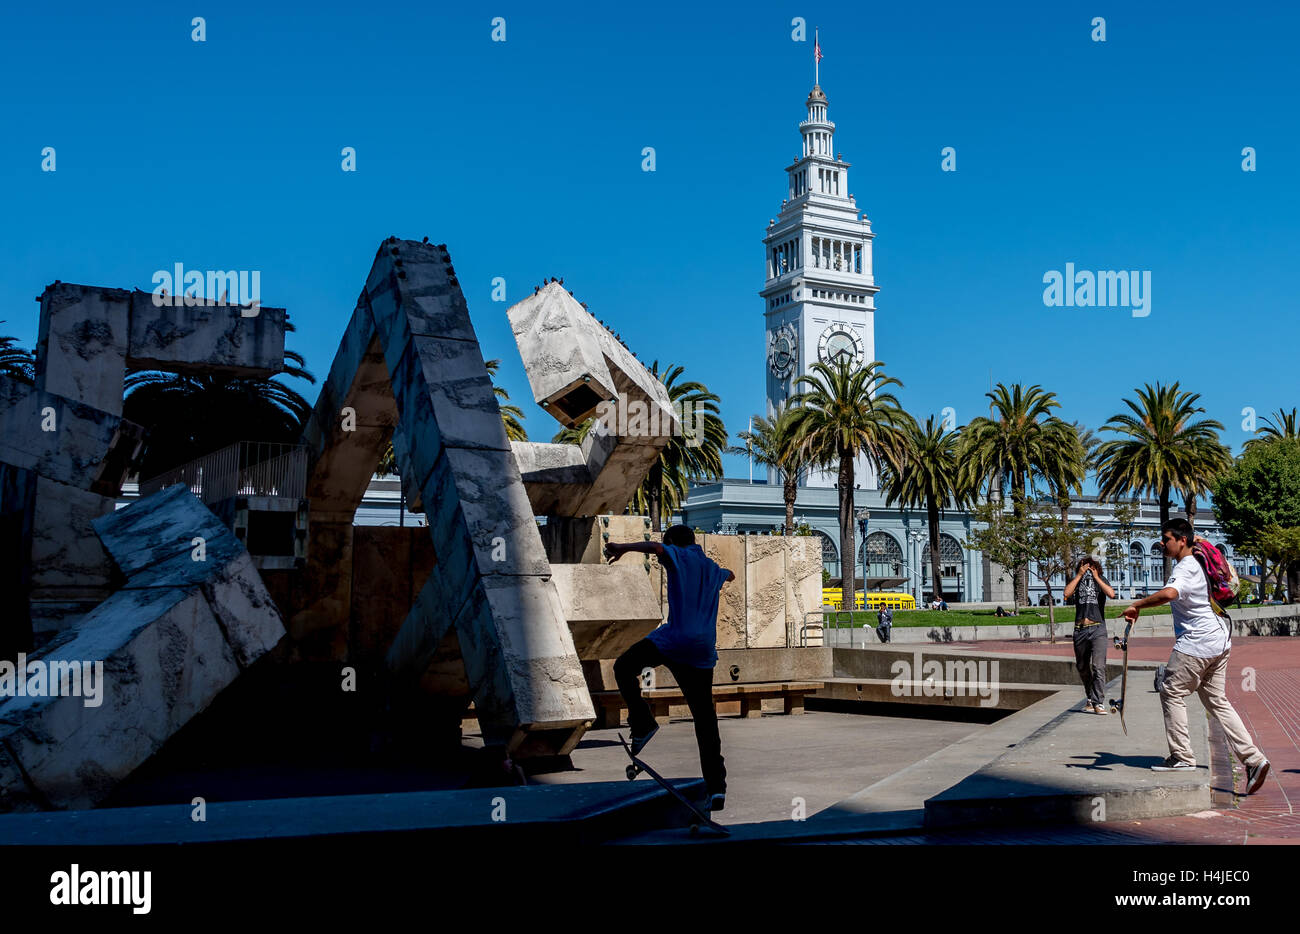 Skateboarders at Vaillancourt Fountain at Justin Herman Plaza at the Embarcadero with San Francisco Ferry Building in background Stock Photo